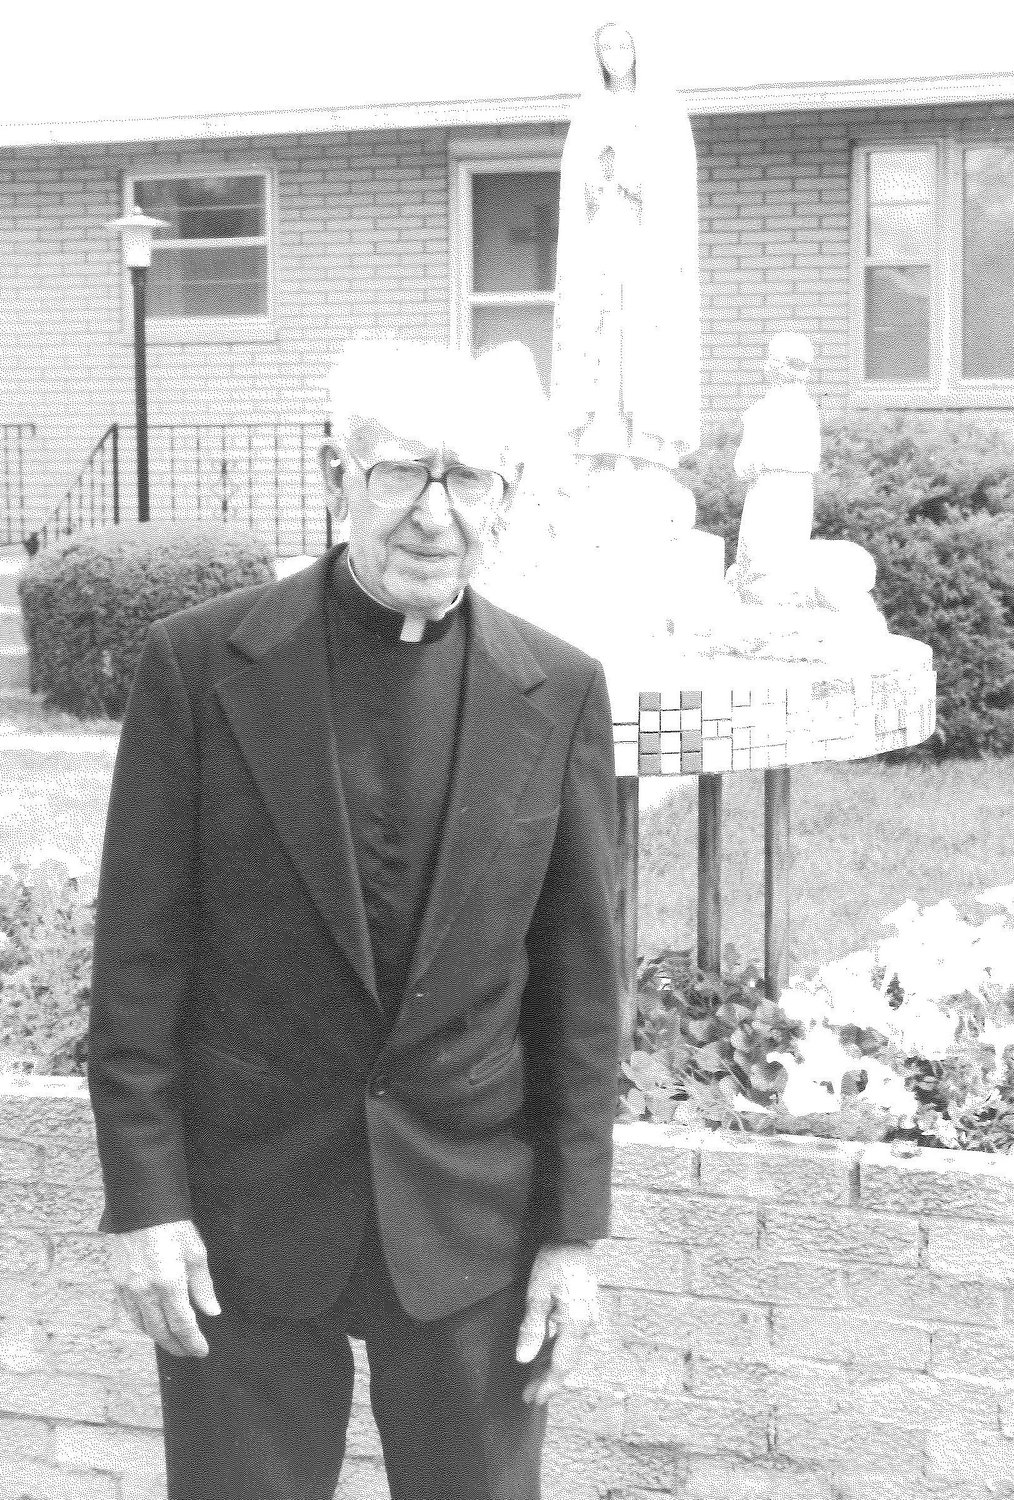 Monsignor Joseph Mahoney, now deceased, stands outside the St. Patrick Rectory in Clarence in this 1985 file photo. The rectory is being converted to transitional housing for mothers and children in need, with help from a Charity and Mercy Grant from Catholic Charities of Central and Northern Missouri.